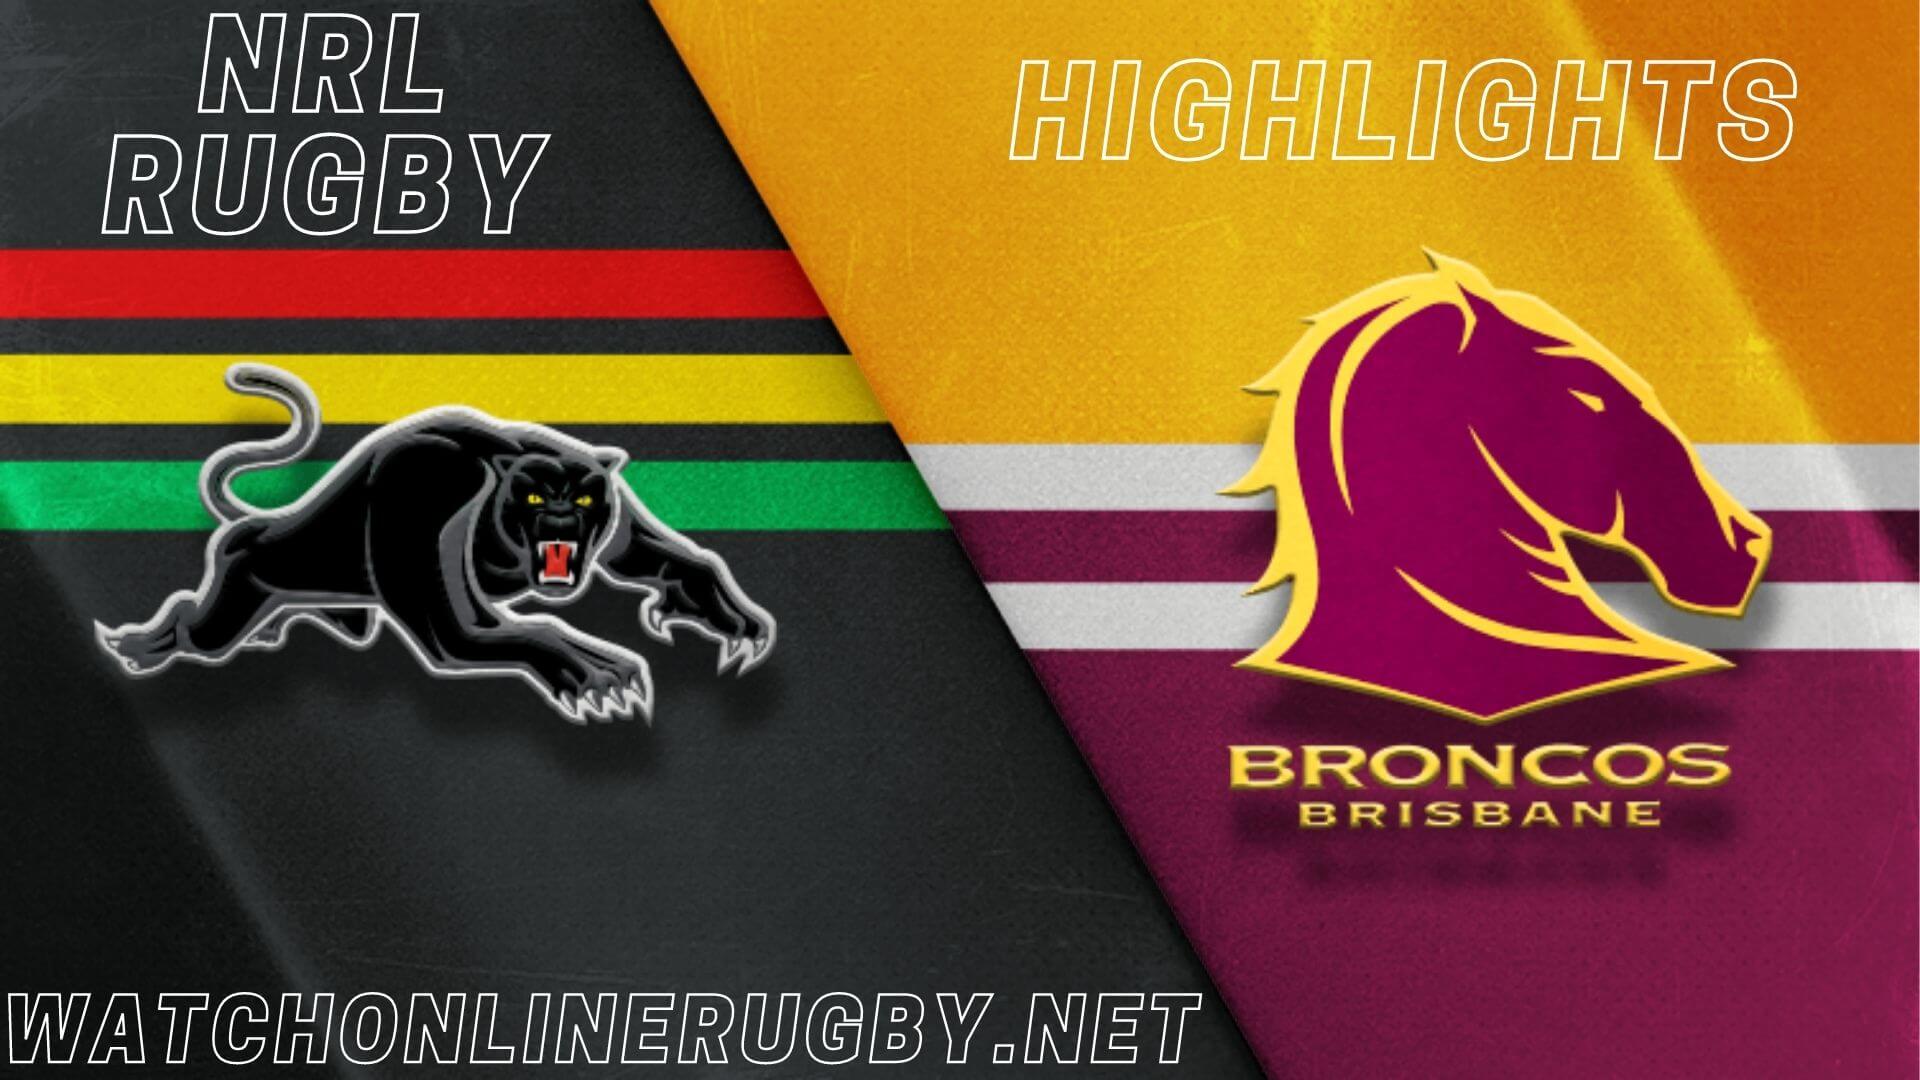 Panthers Vs Broncos Highlights RD 6 NRL Rugby